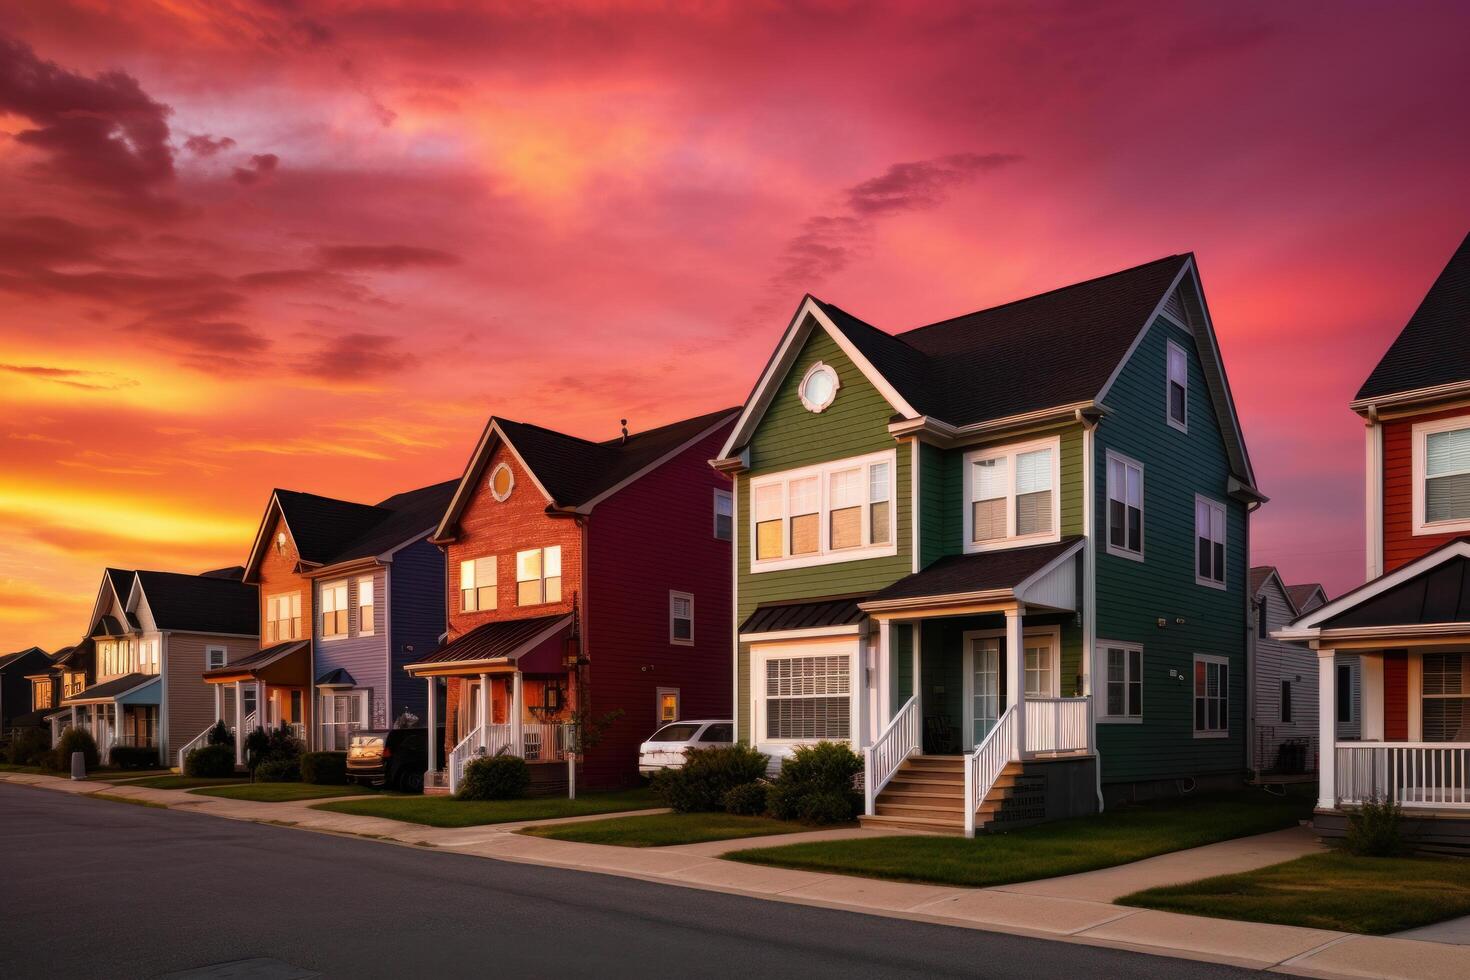 Homes in residential district with dramatic colourful sunset skies. Illustration photo